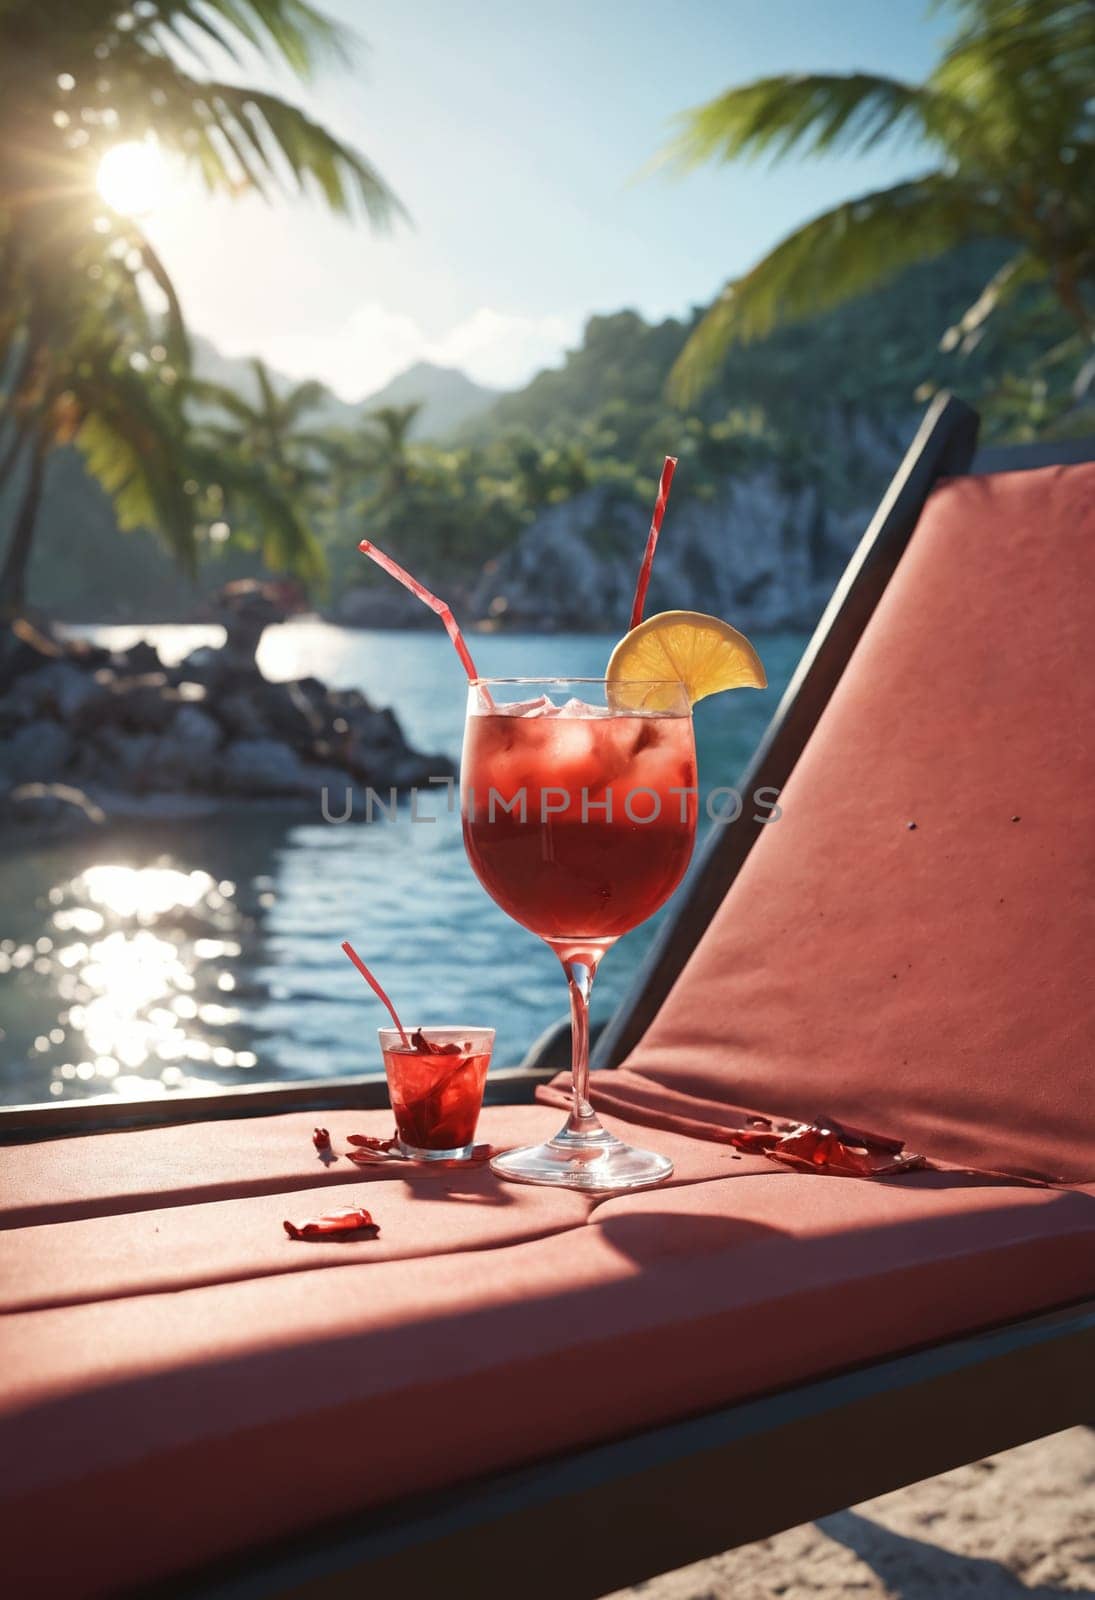 A red cocktail on a wooden surface captures the essence of a tropical beach getaway.